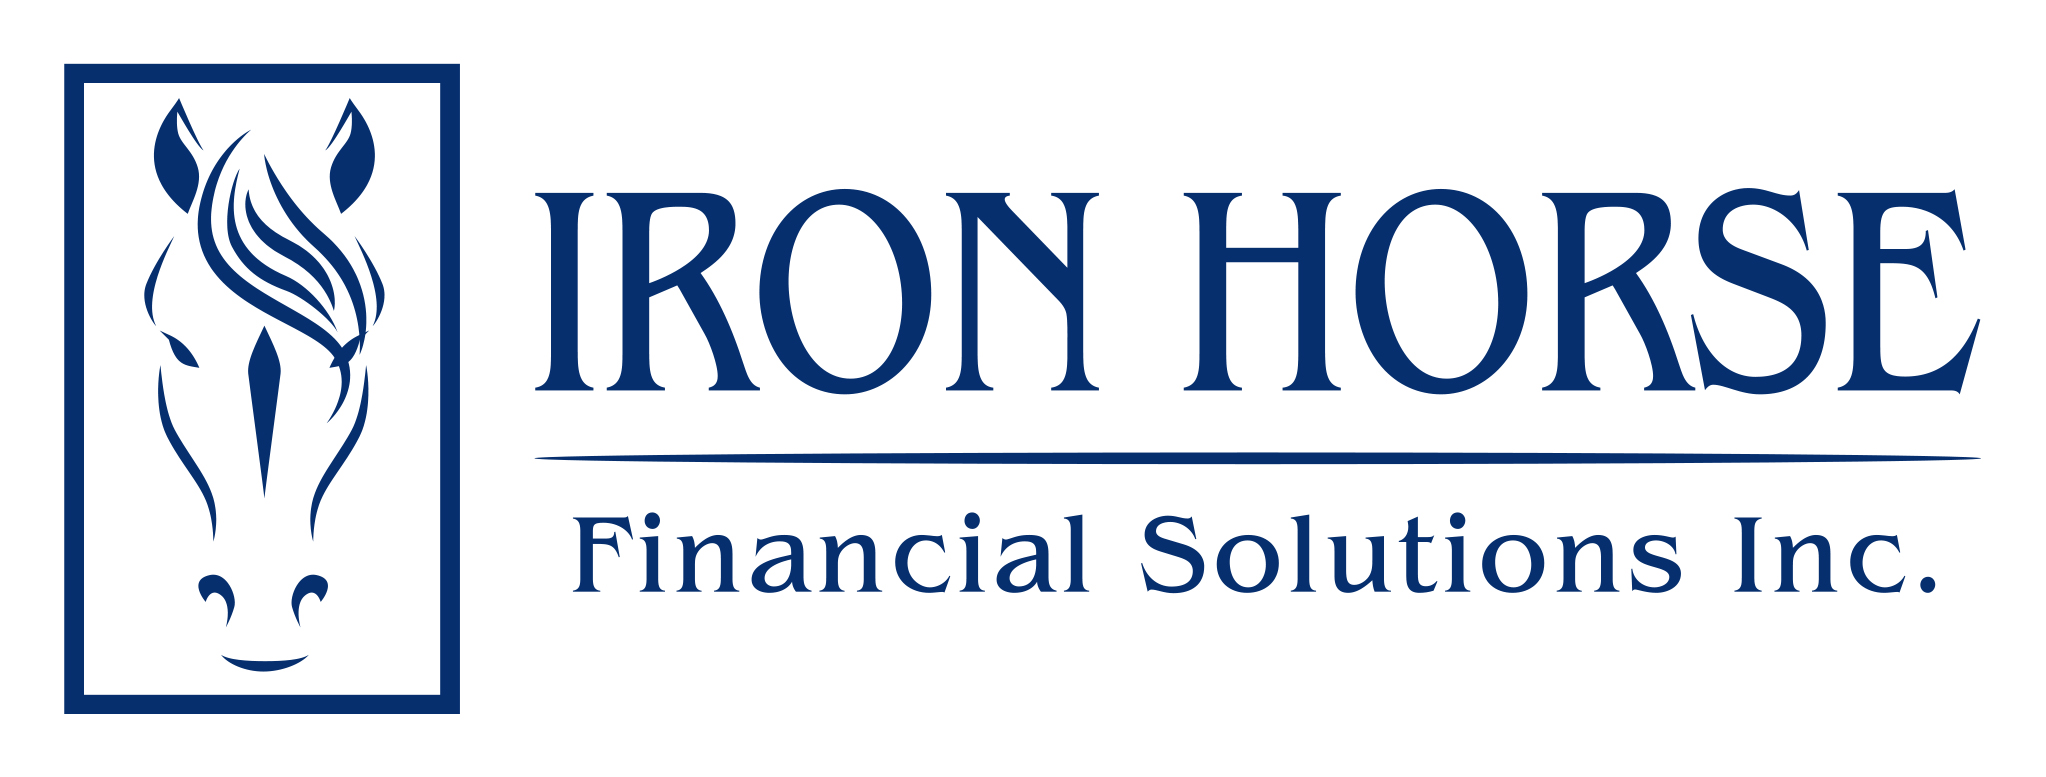 Iron Horse Financial Solutions